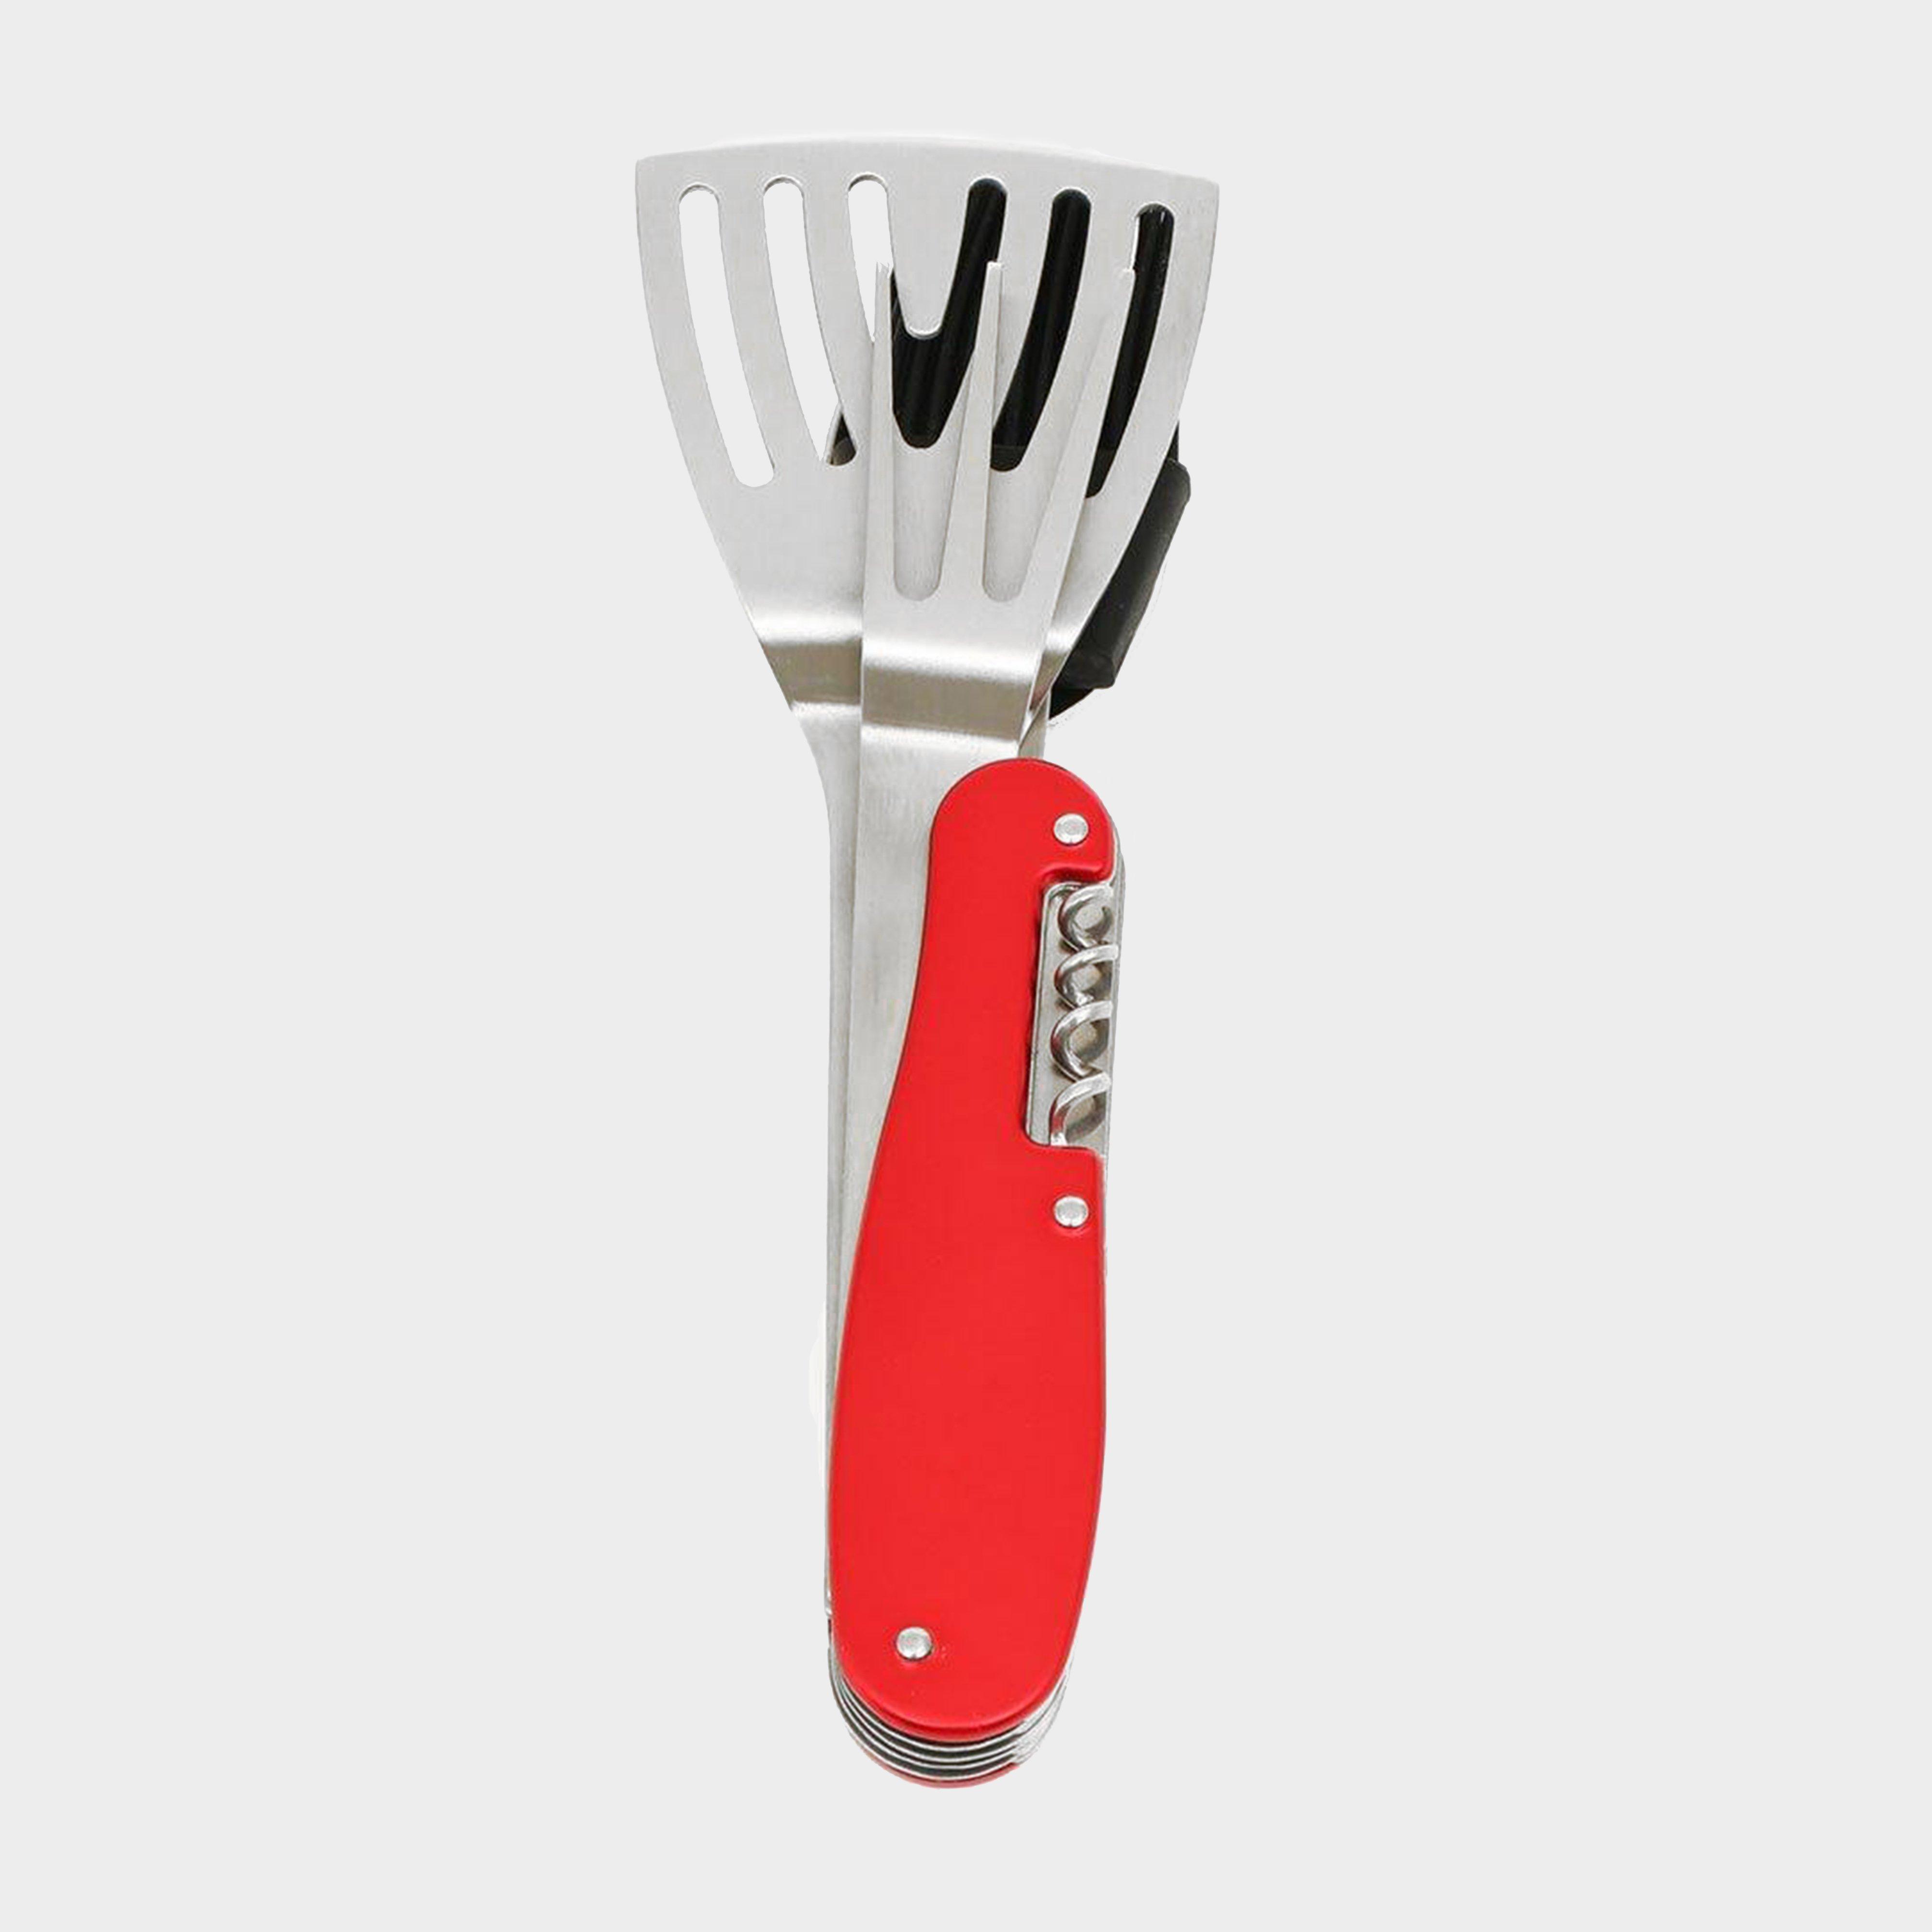 Hi-Gear Compact Barbecue 6 in 1 Tool Review